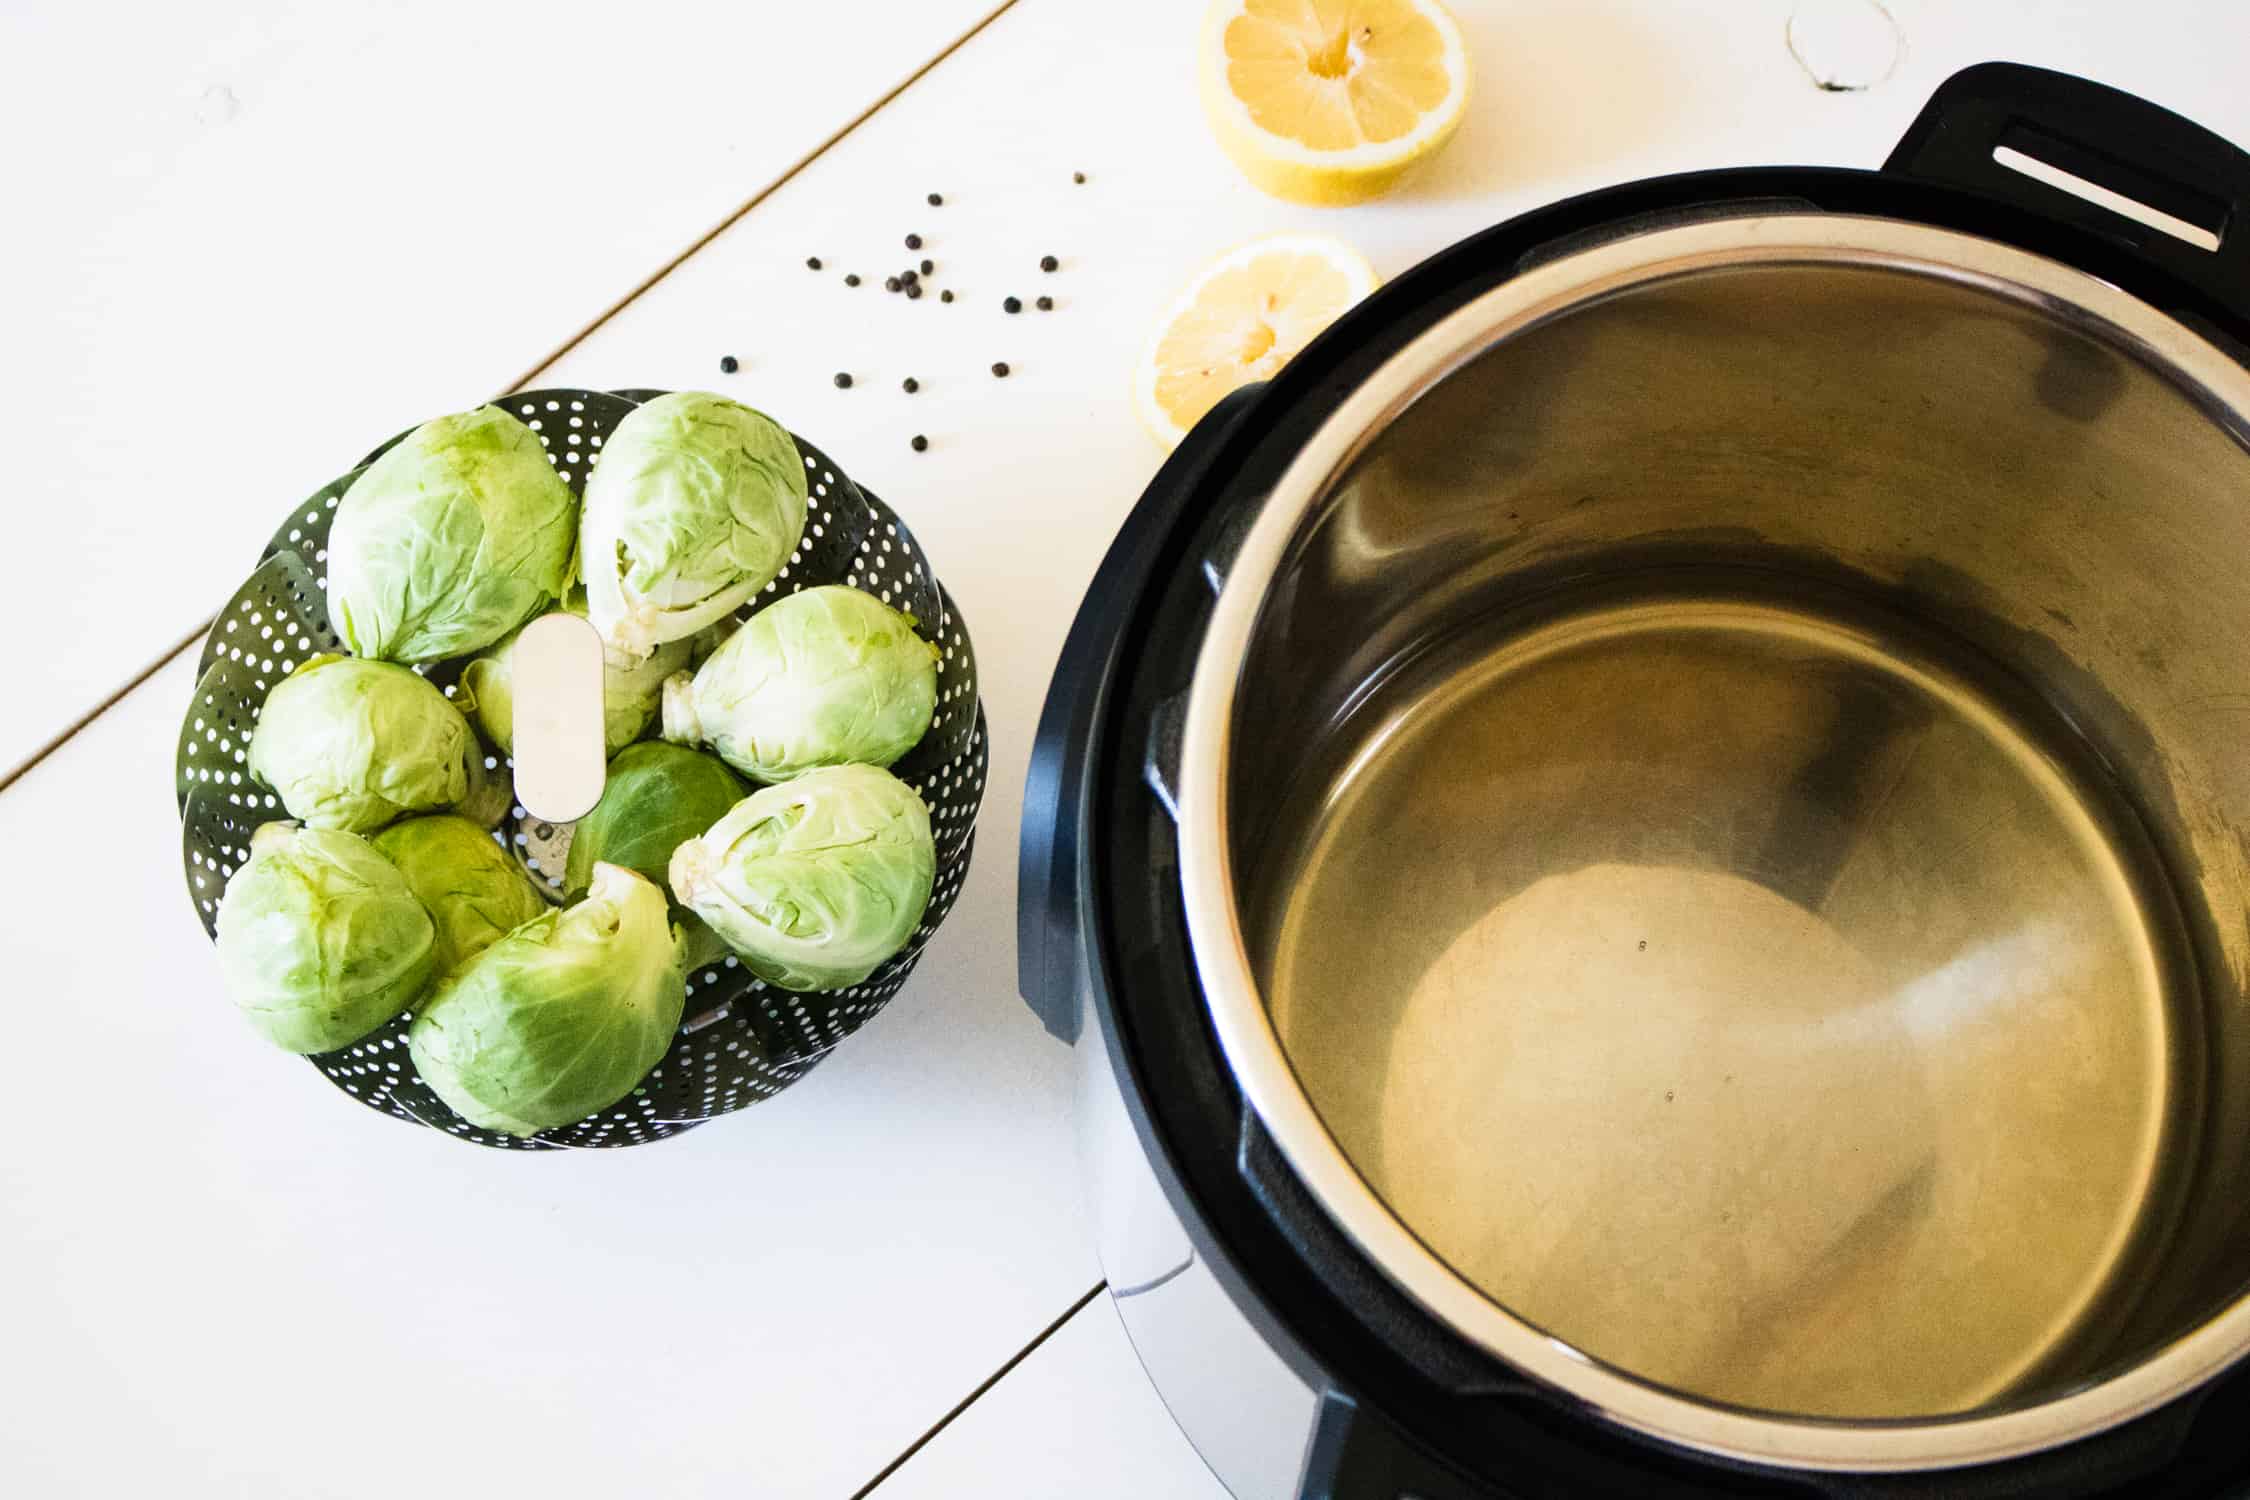 top-down view of instant pot with chicken broth inside, sitting next to steamer basket filled with Brussels sprouts, with whole peppercorns and a lemon cut in half placed behind them on the counter